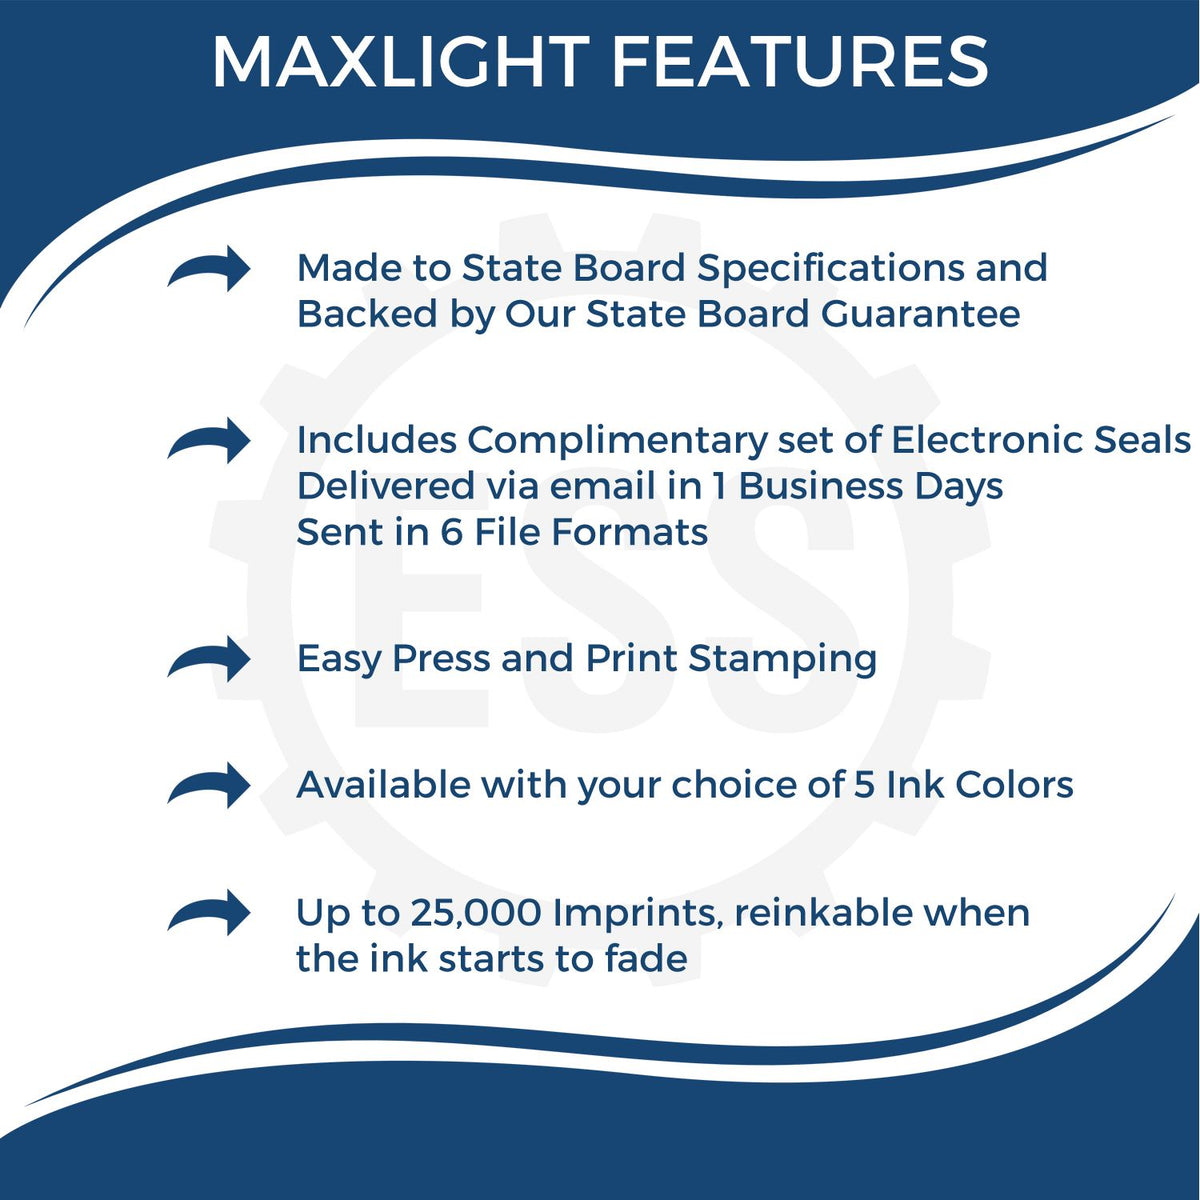 A picture of an infographic highlighting the selling points for the Premium MaxLight Pre-Inked New Jersey Landscape Architectural Stamp